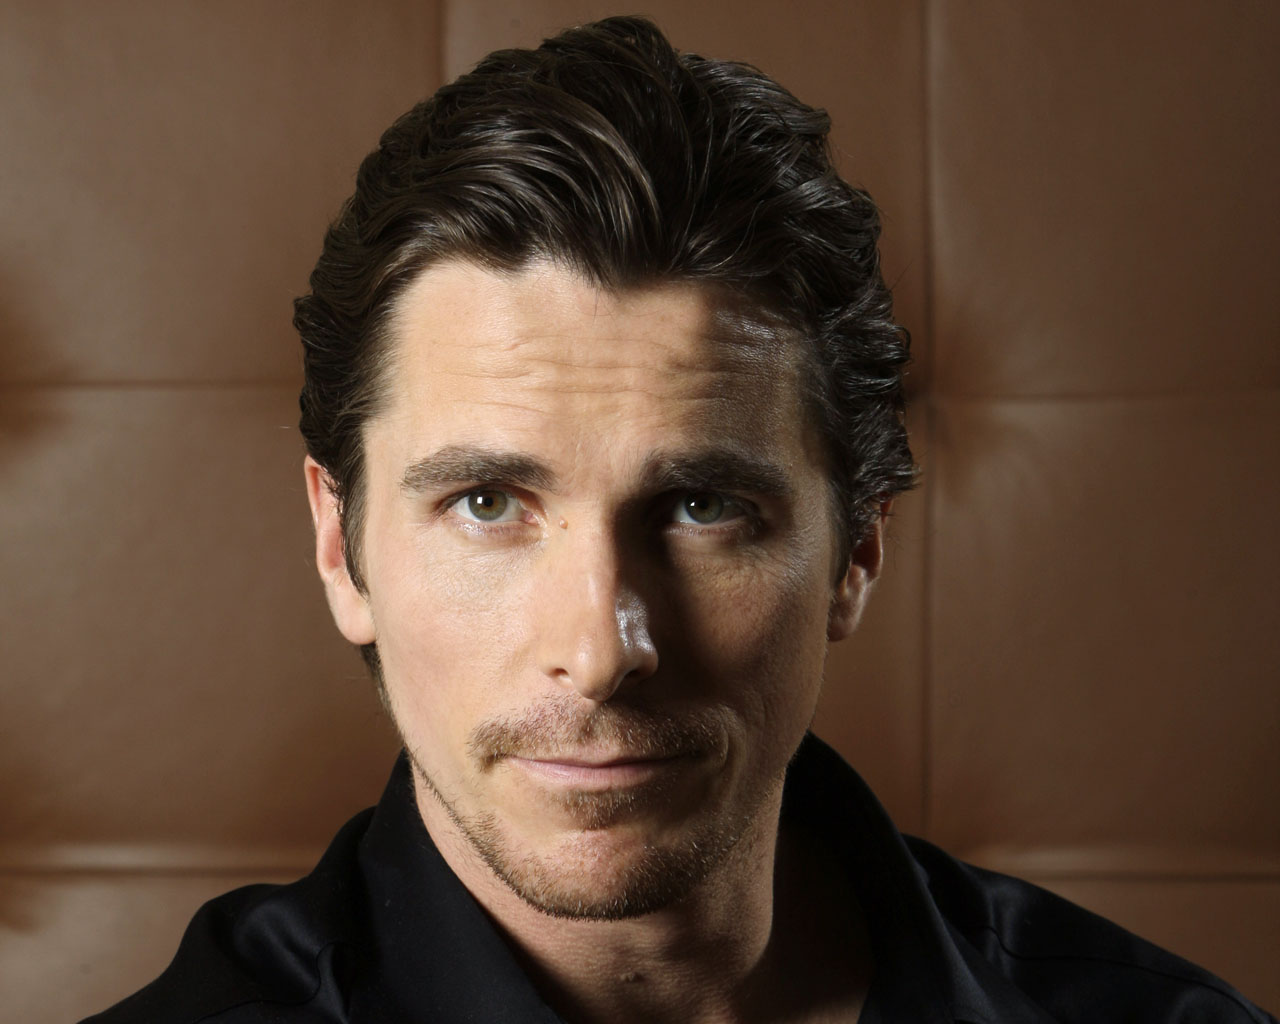 roles overview Christian Bale movies